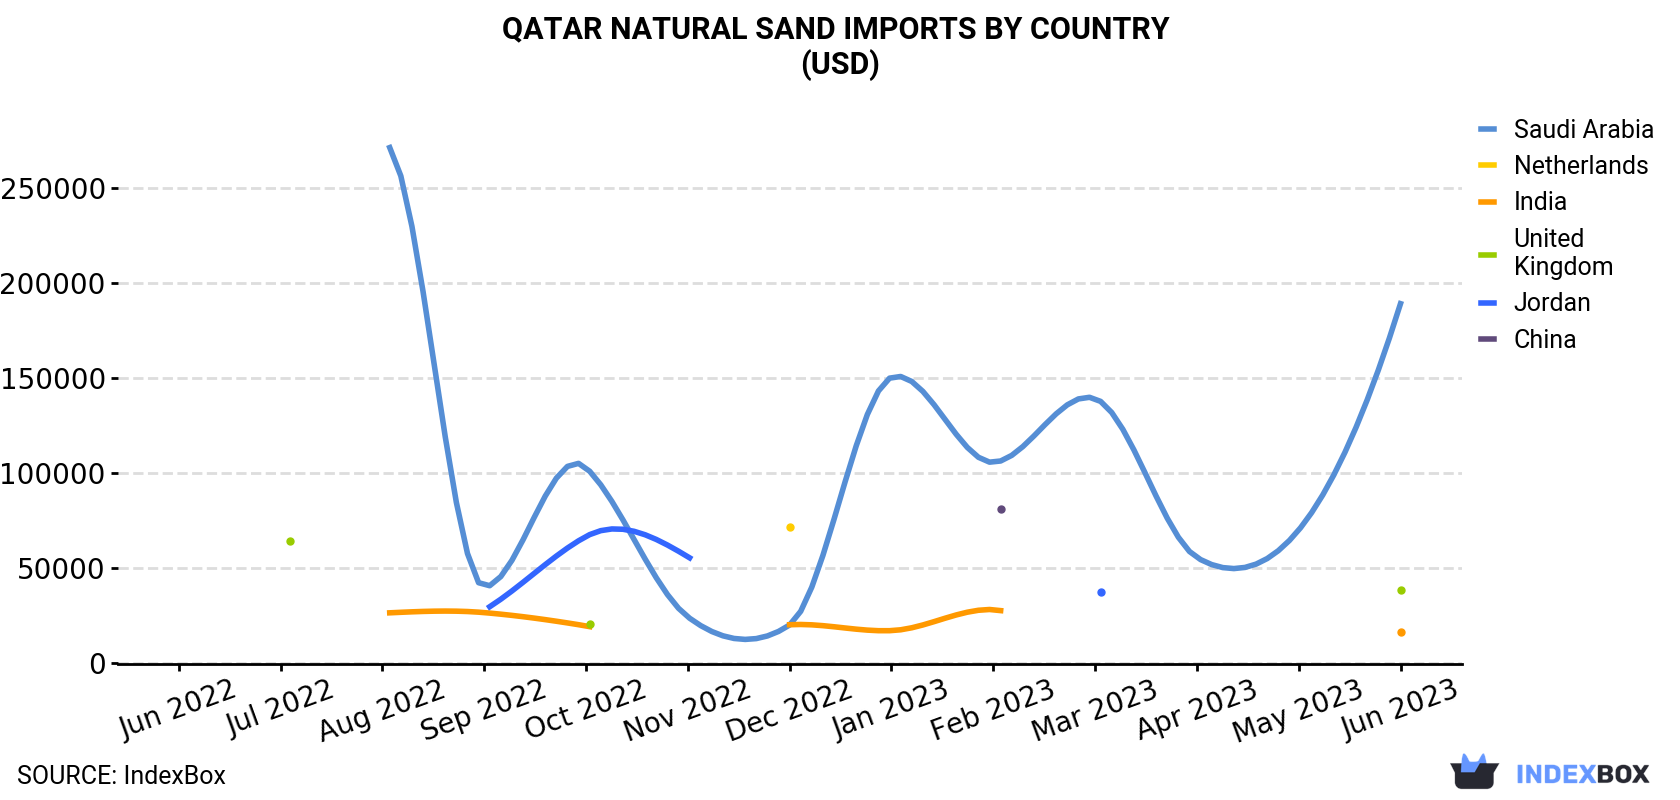 Qatar Natural Sand Imports By Country (USD)